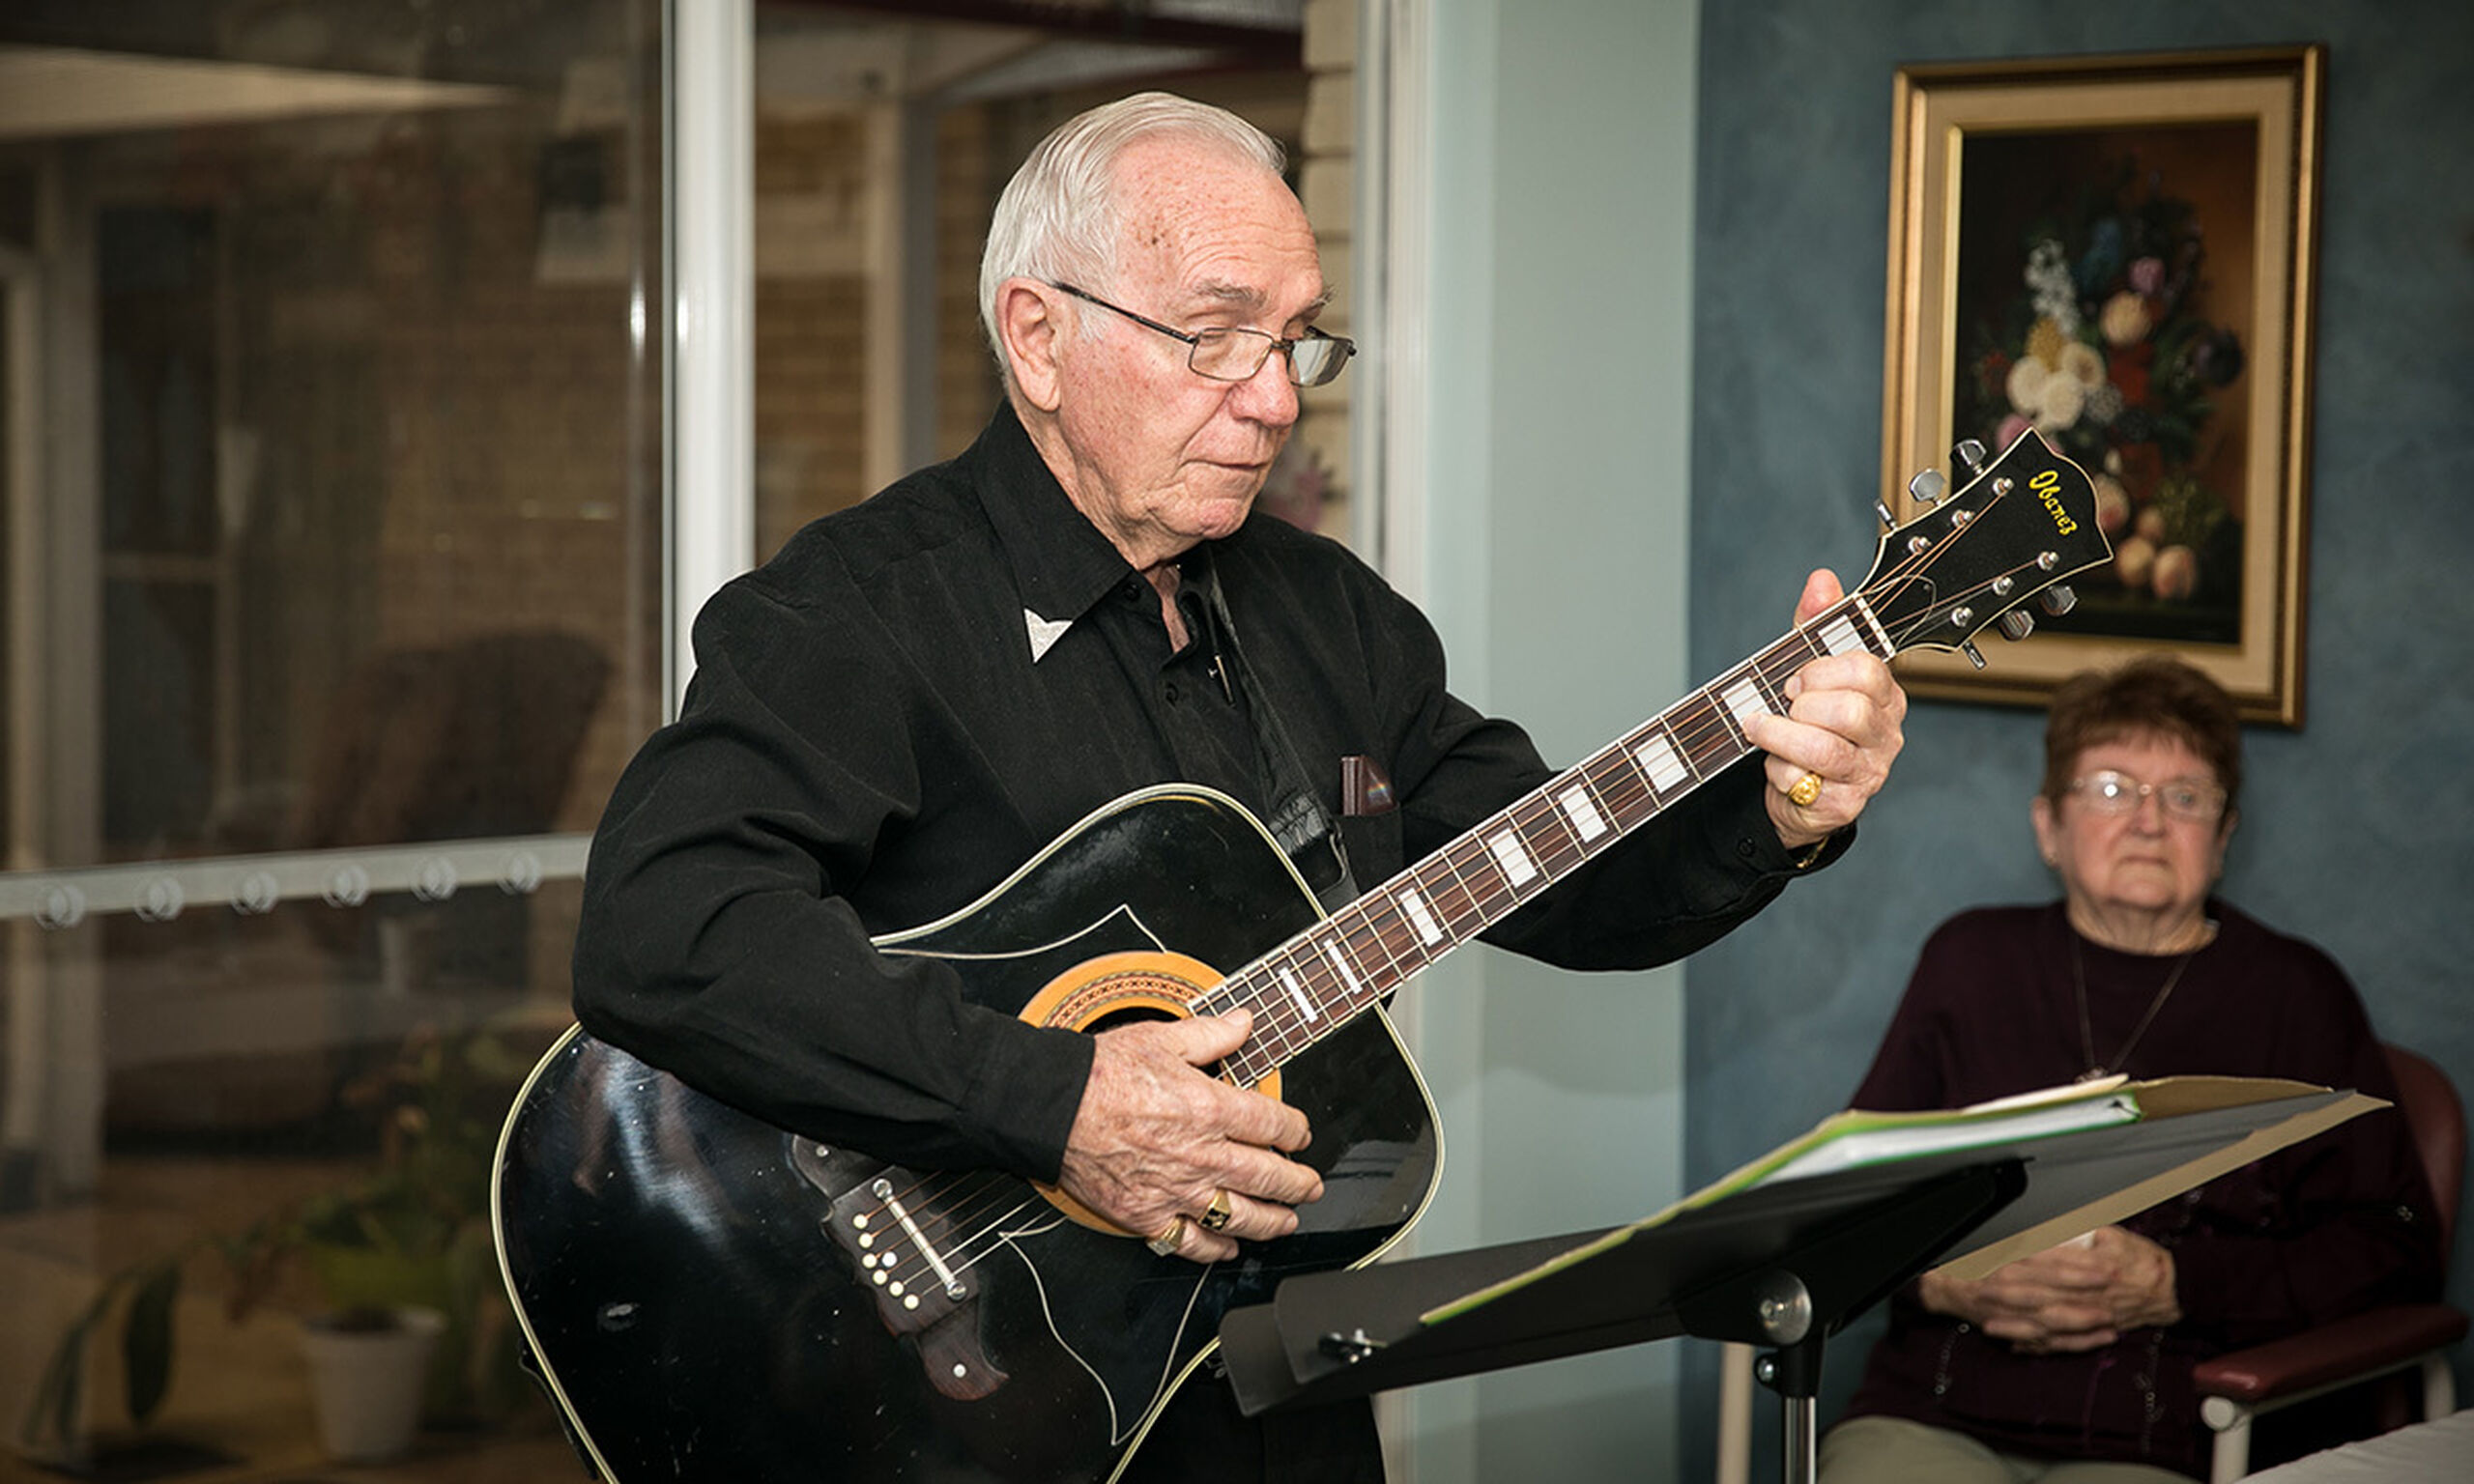 Volunteer singers make a difference in the lives of Baptistcare residential care residents